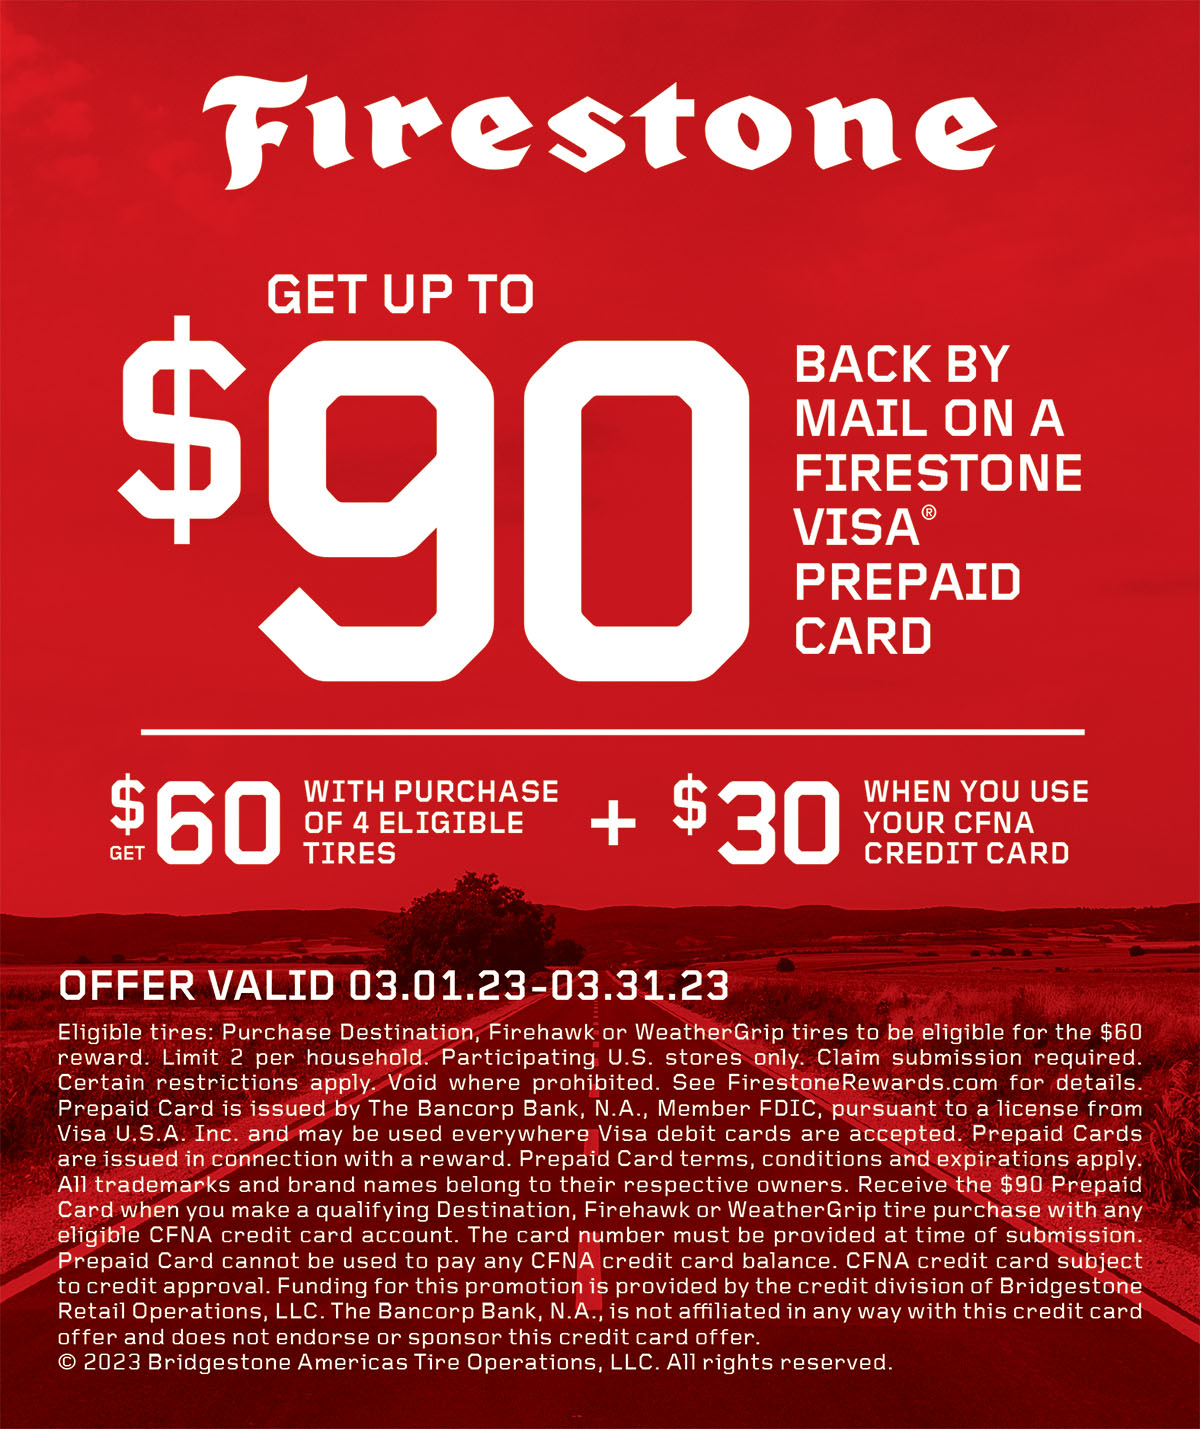 Firestone March Rebate - Get up to $90 back by mail - Valid 3/1/2023 - 3/31/2023